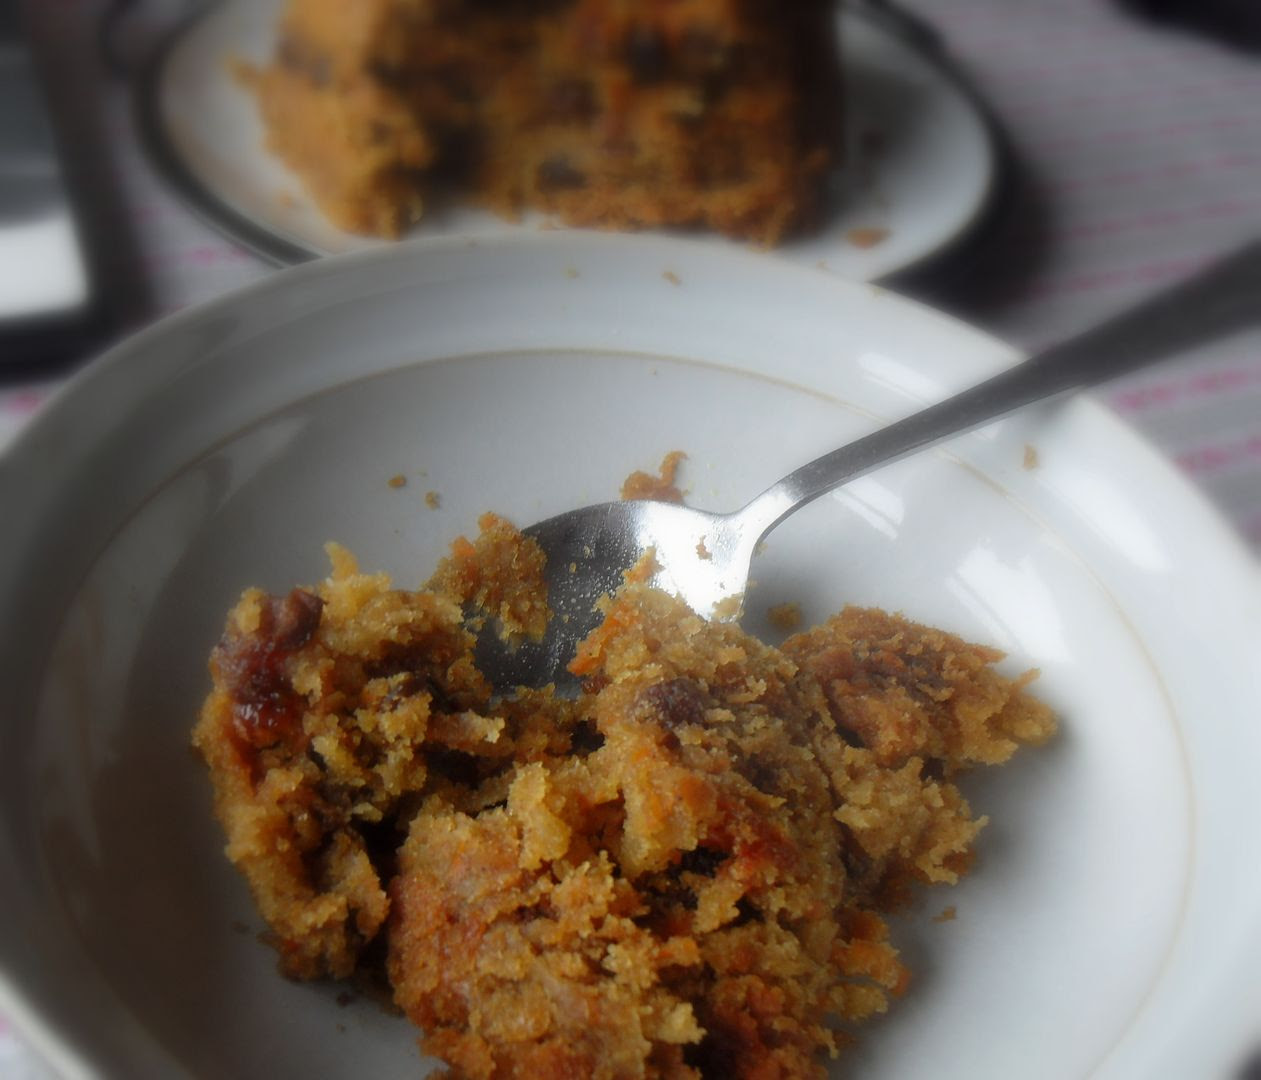 Carrot Pudding with a Brown Sugar Sauce